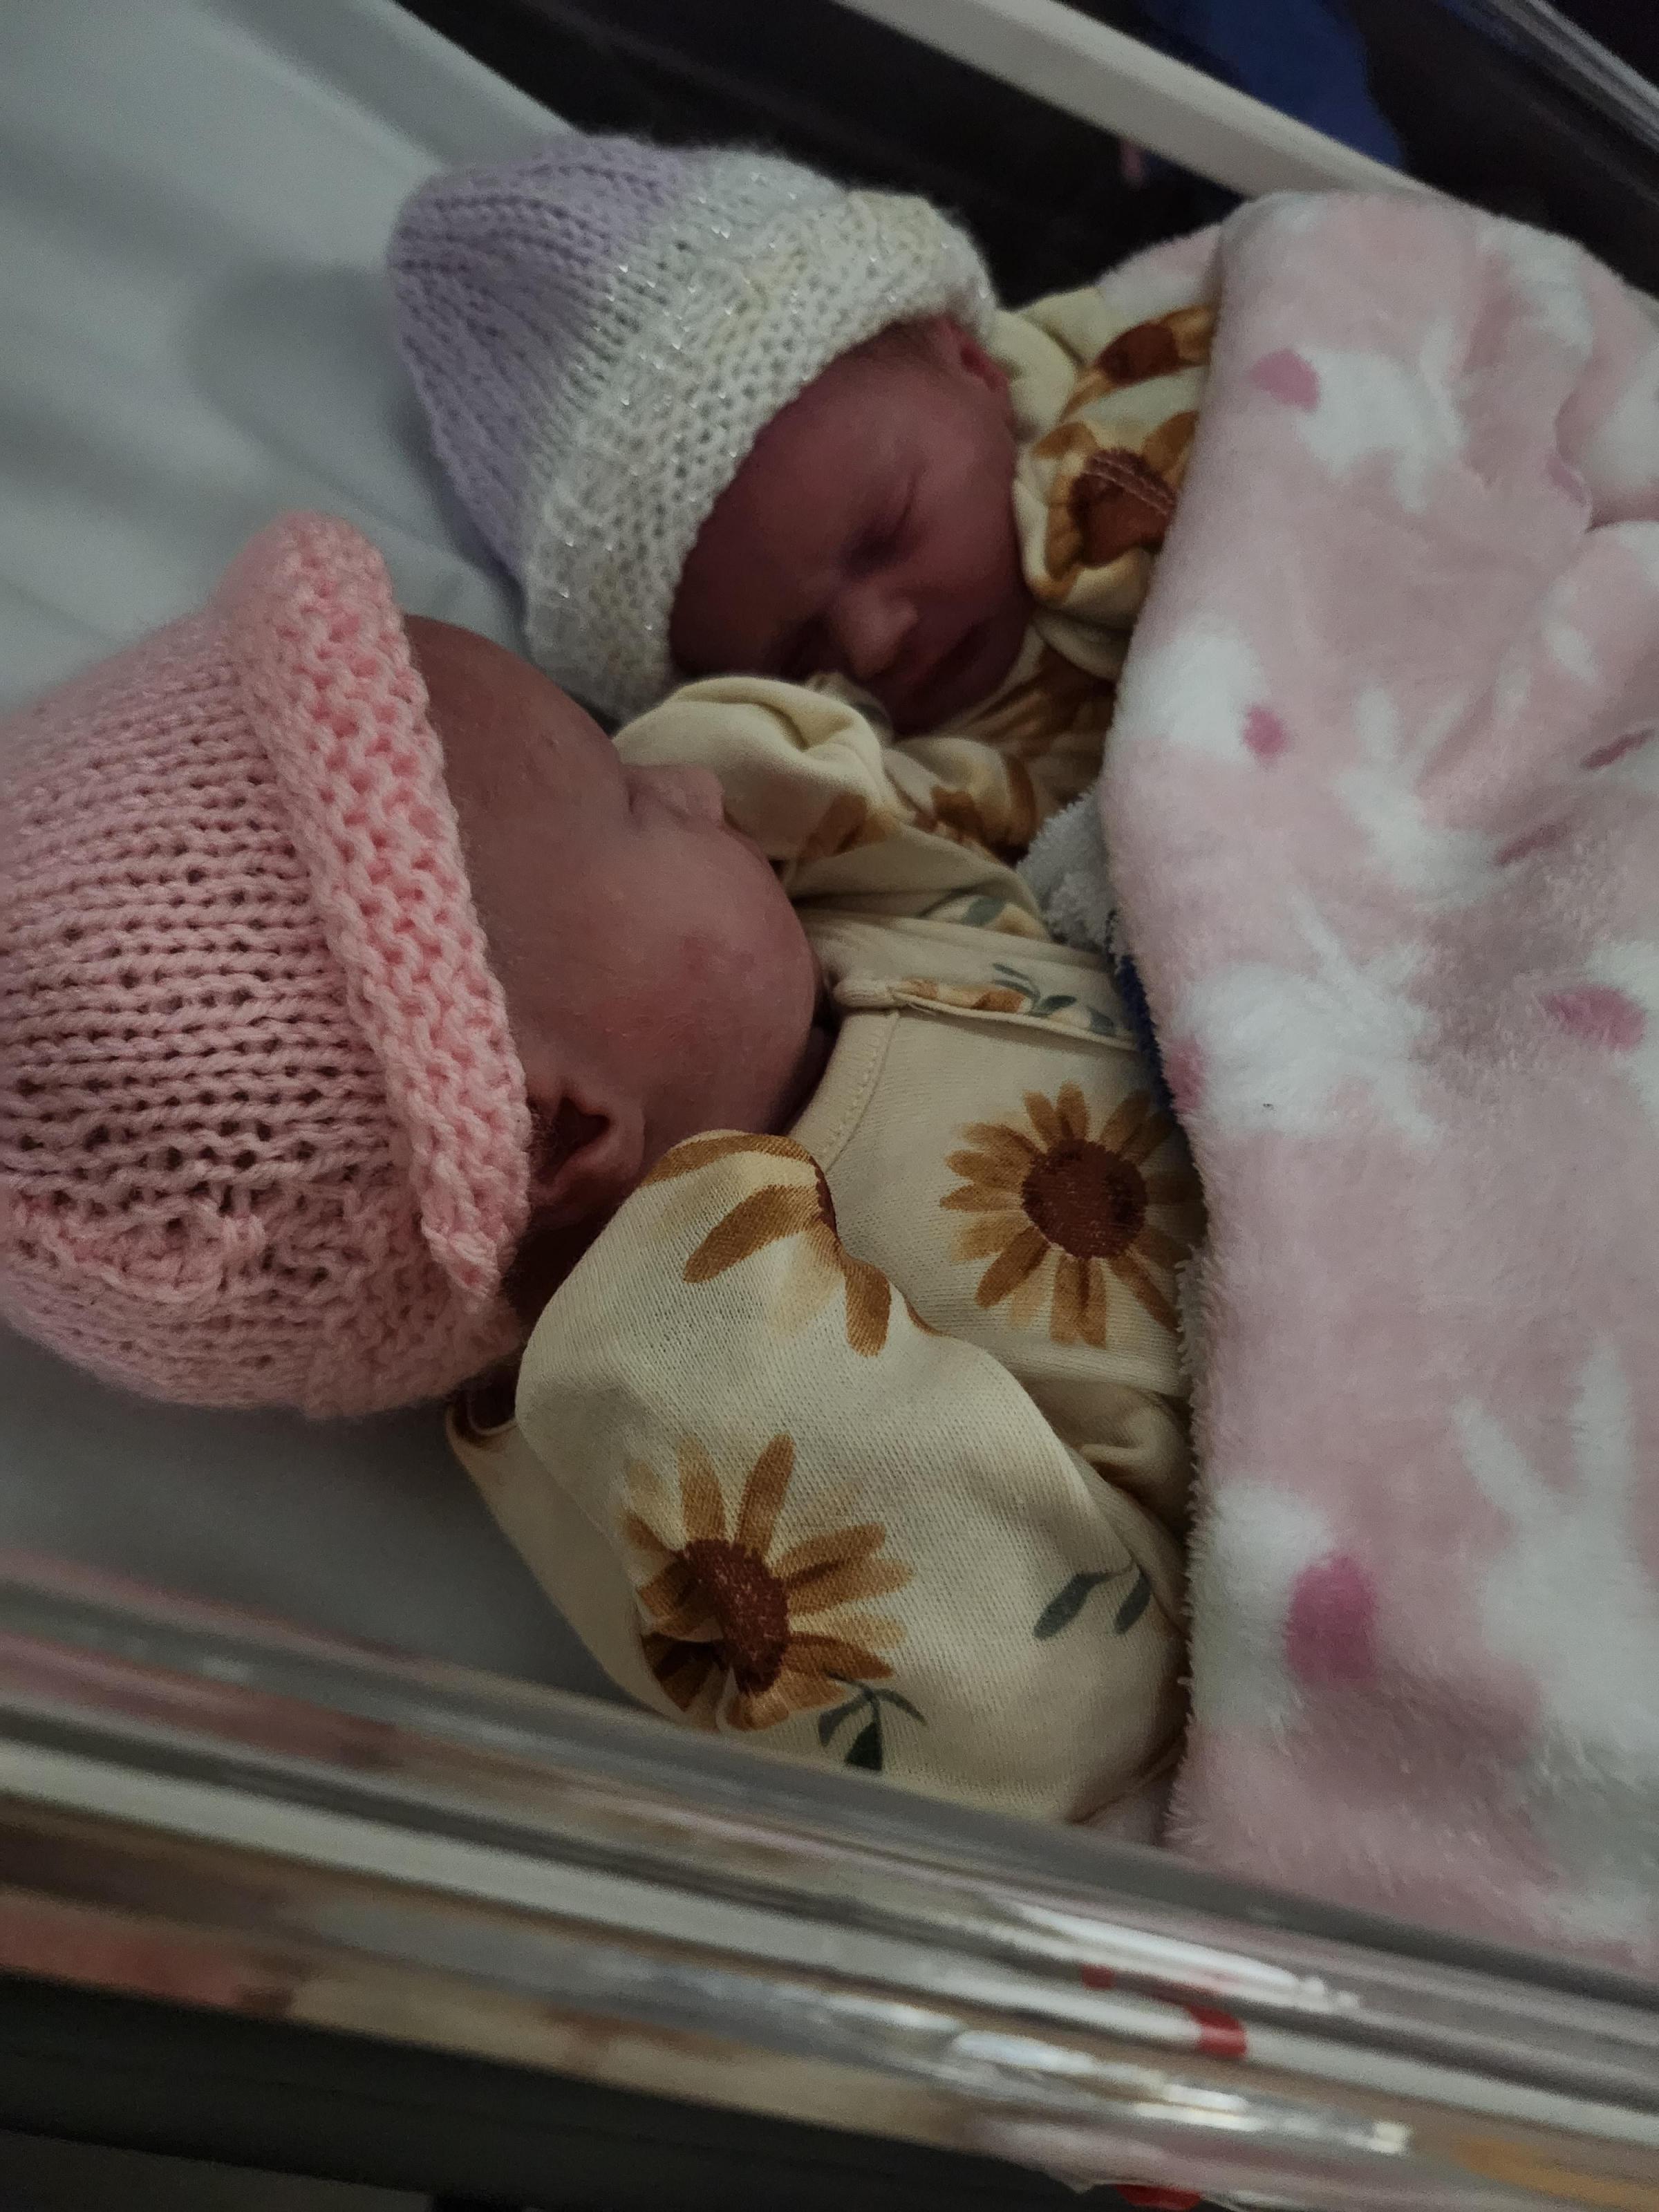 Evelyn Rose Valentine and Layla Marie Valentine.